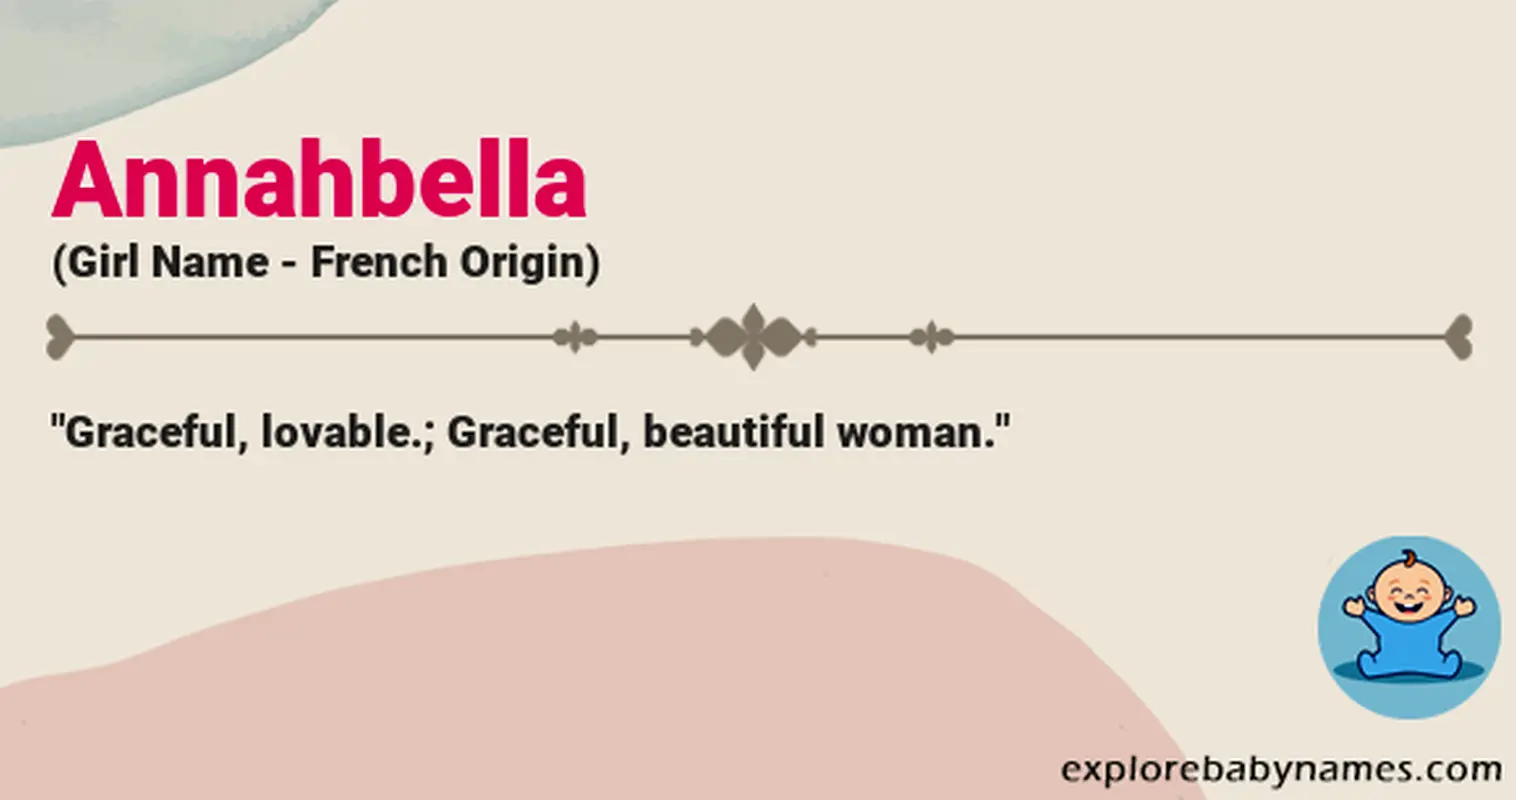 Meaning of Annahbella